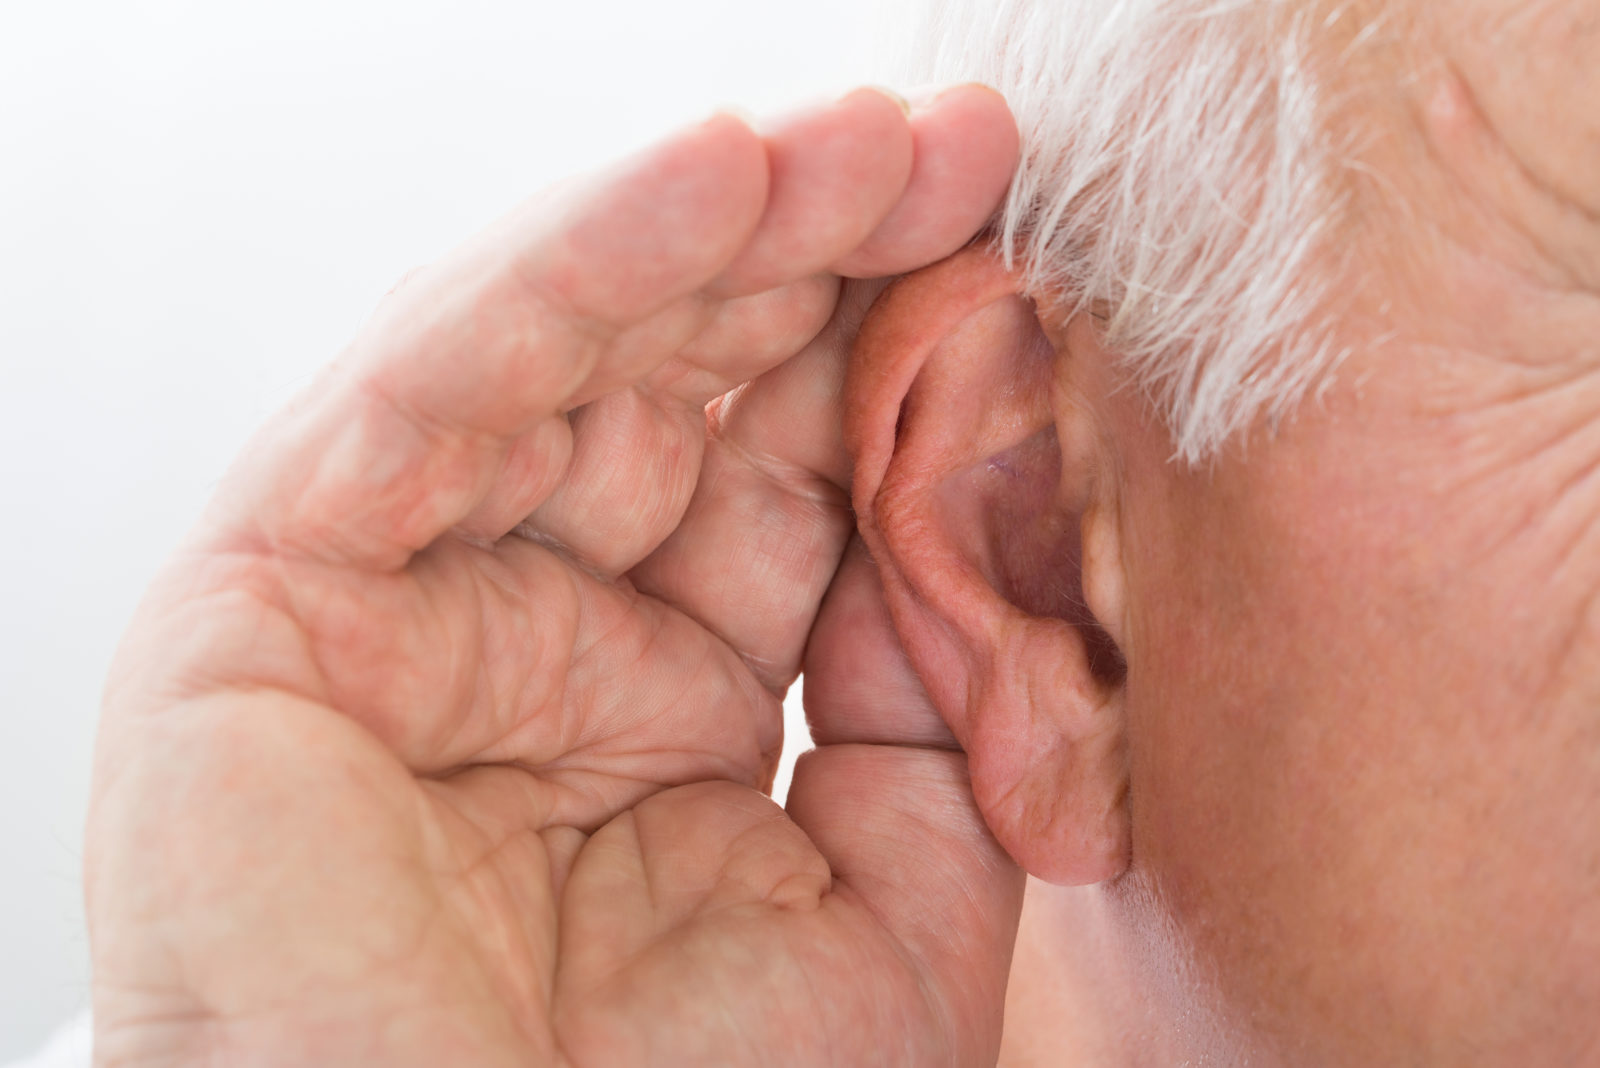 close up image of a man holding his cupped hand to his ear, indicating that he cannot hear well